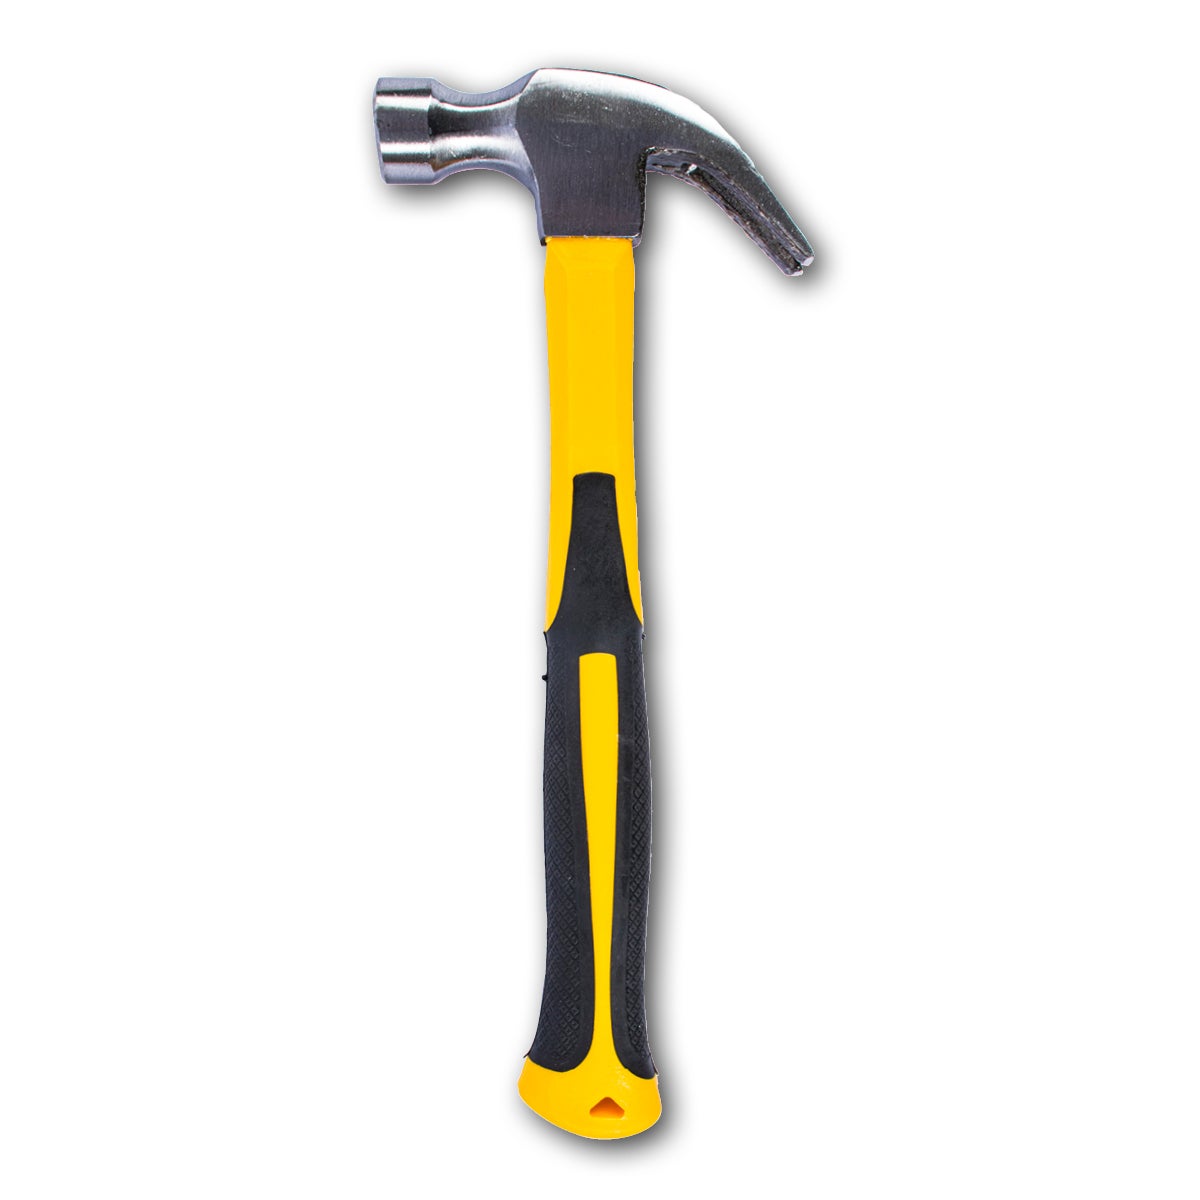 Handy Hardware Claw Hammer Steel All-Purpose Soft Grip Strong Performance 700g